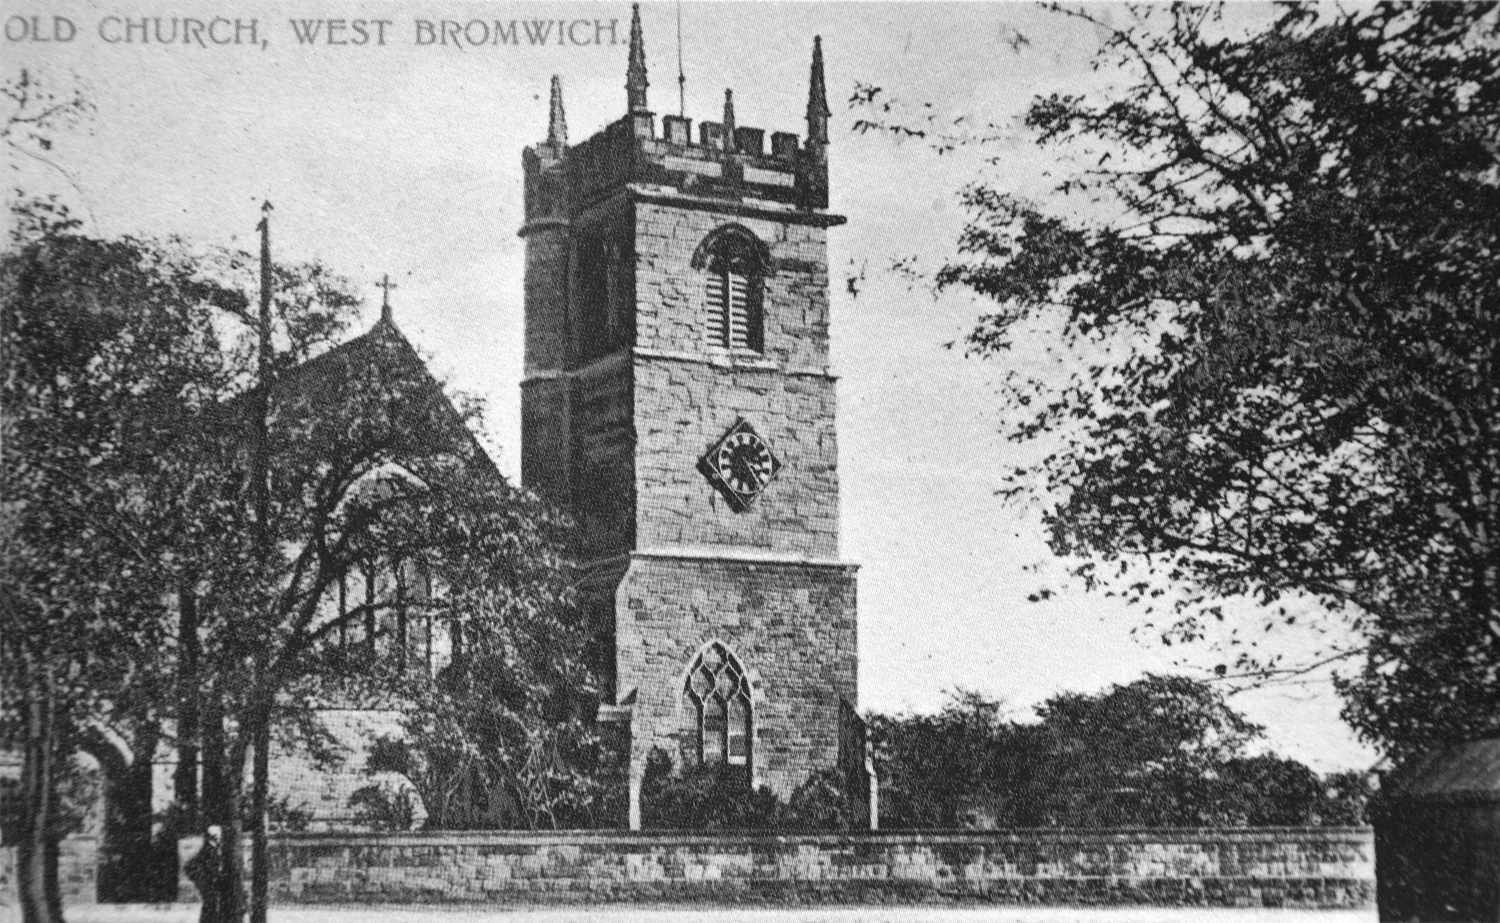 All Saints Church West Bromwich Local History Society